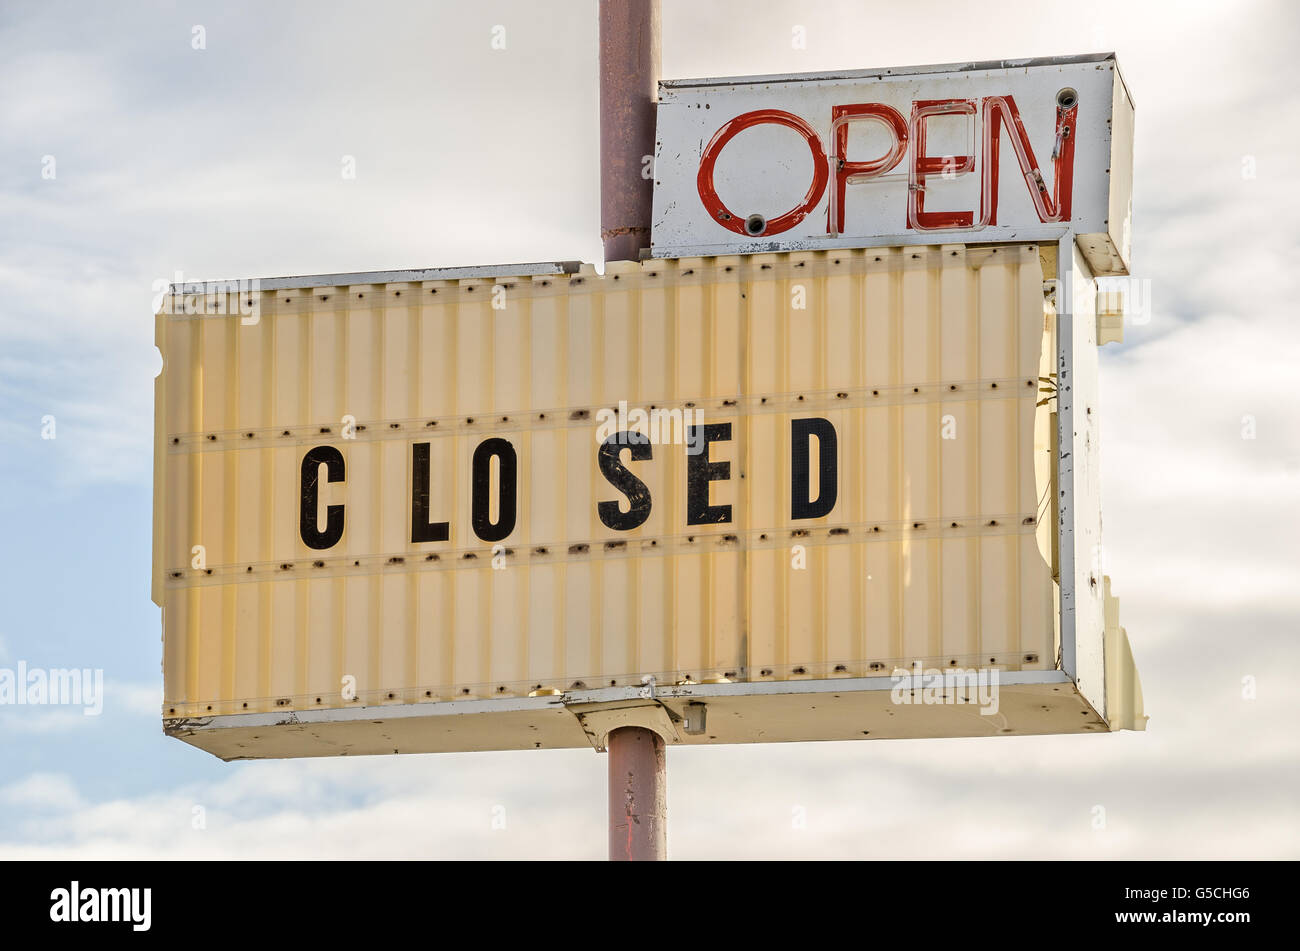 Signs showing both open and closed causing confusion Stock Photo